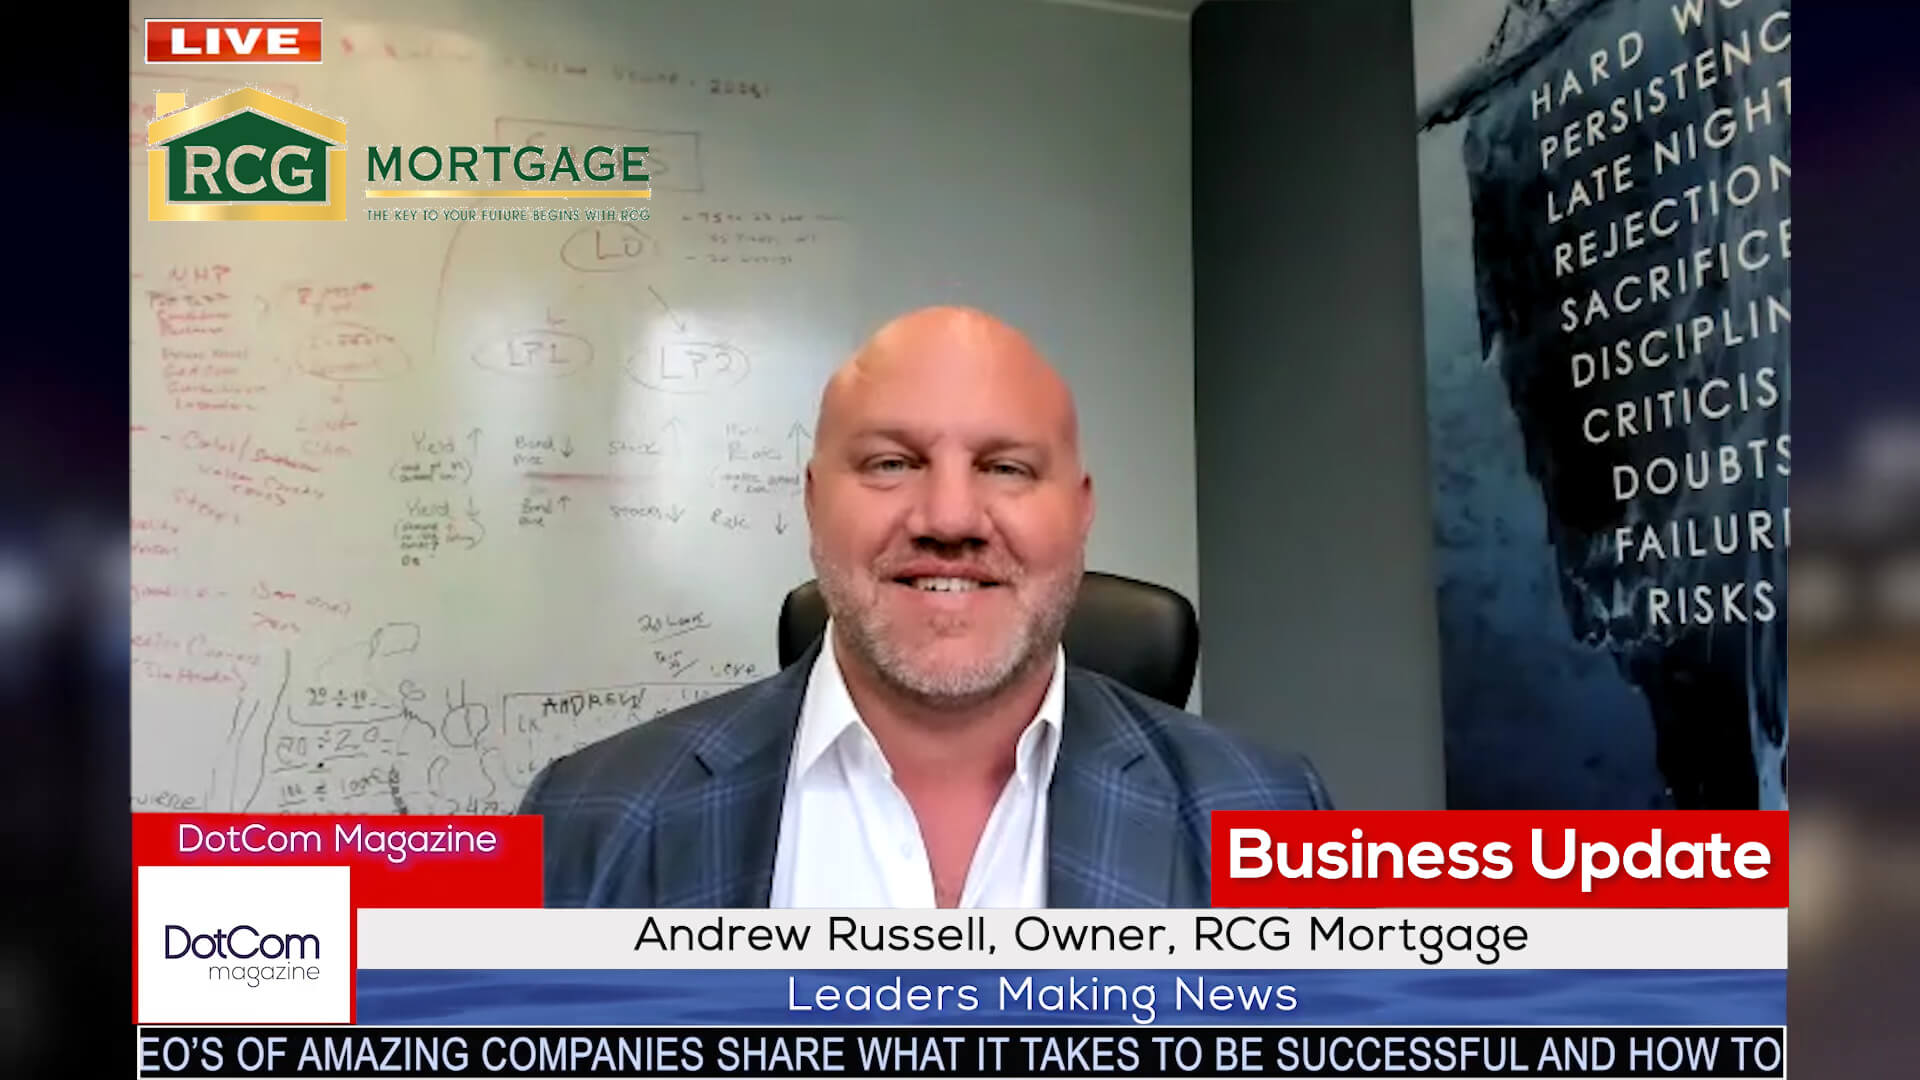 Andy Jacob Interviews Andrew Russell, Owner, RCG Mortgage On the DotCom Magazine Entrepreneur Spotlight Series.